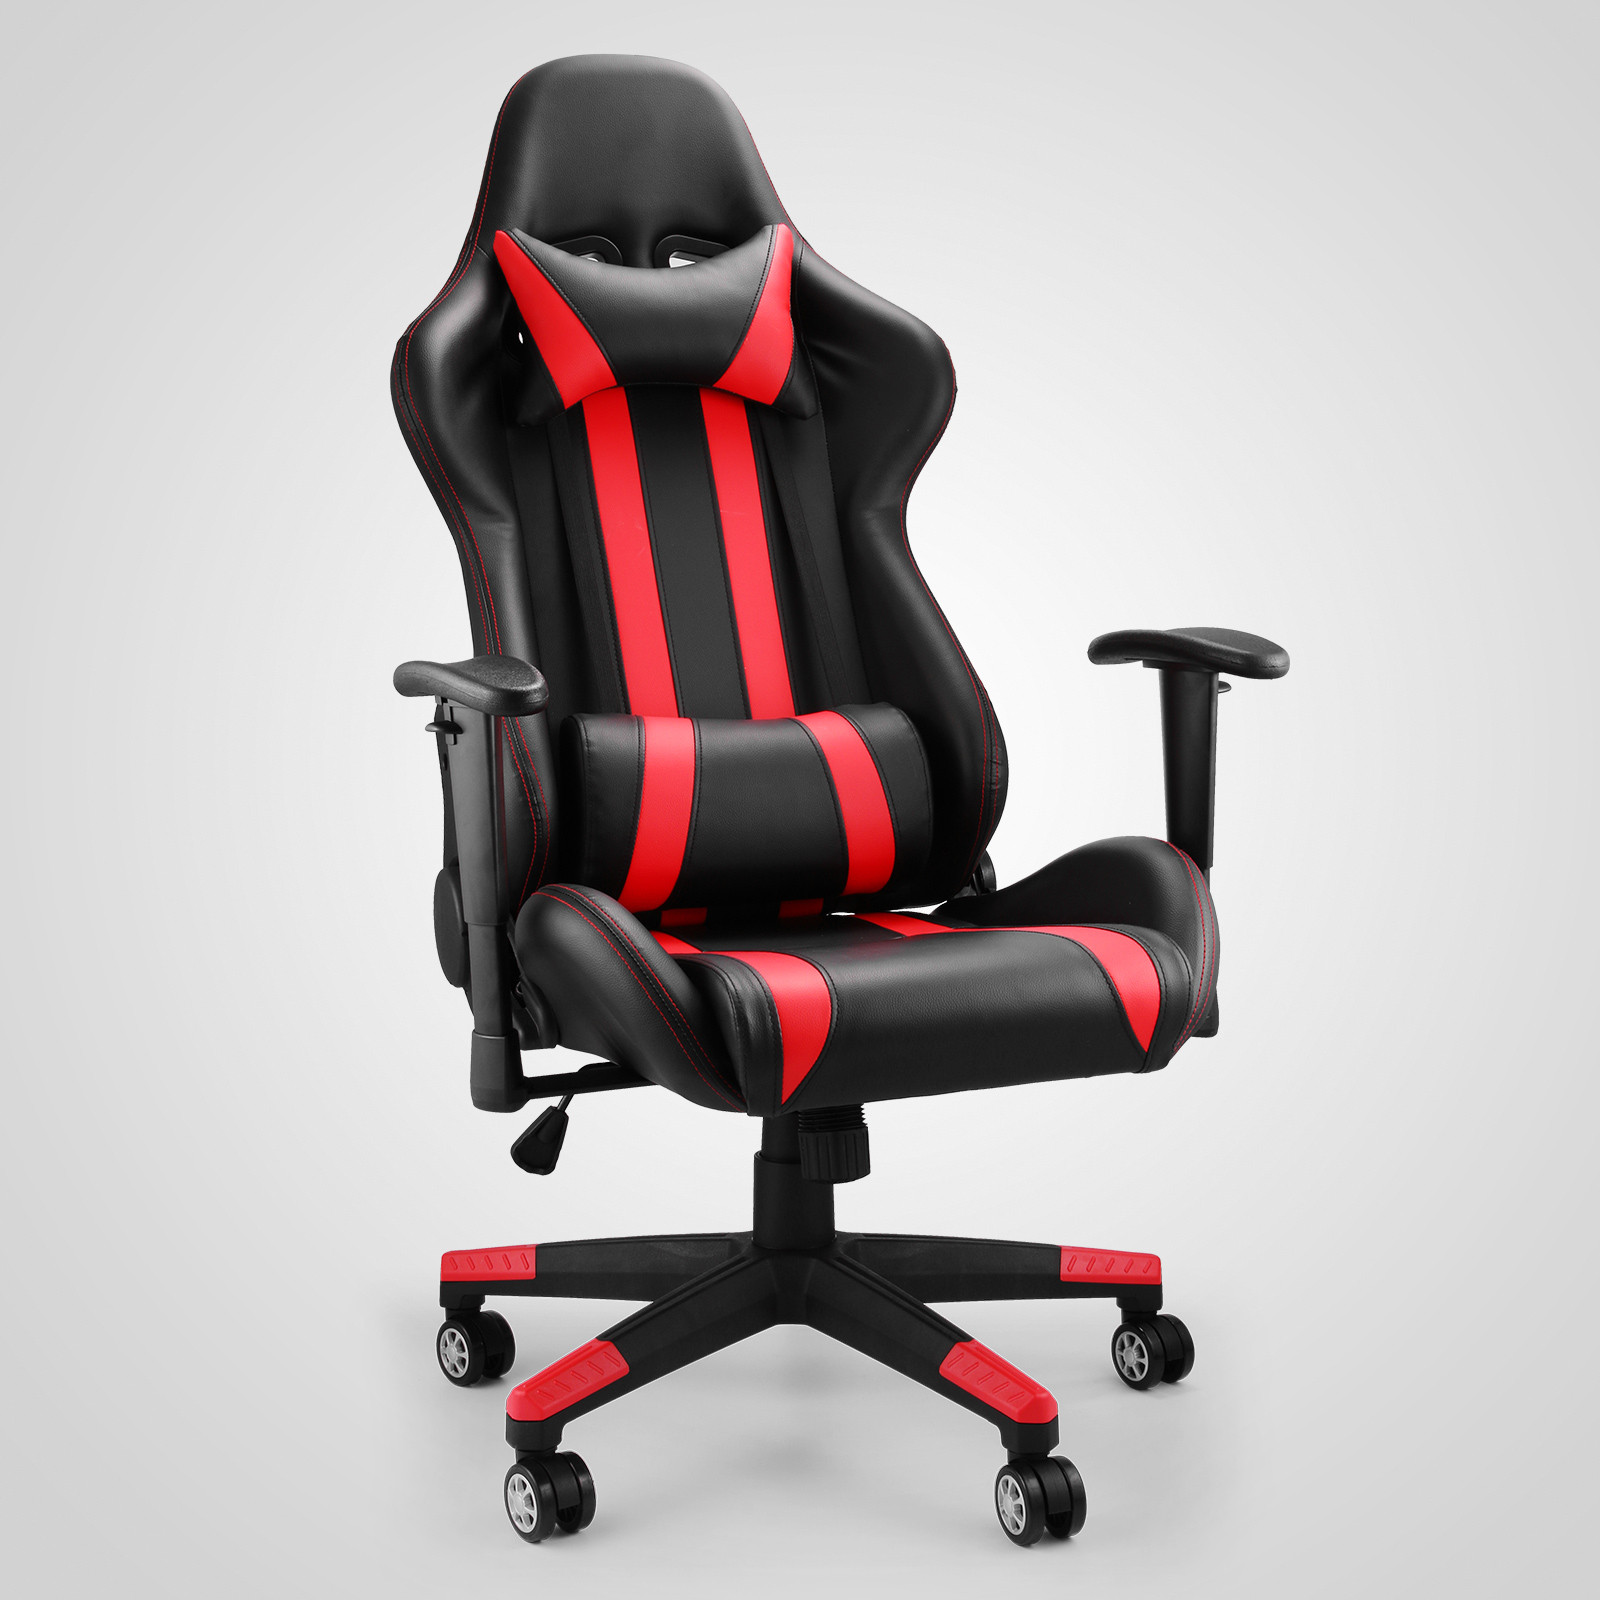 Black and Red Gaming Chair Office Chair Race Computer Game